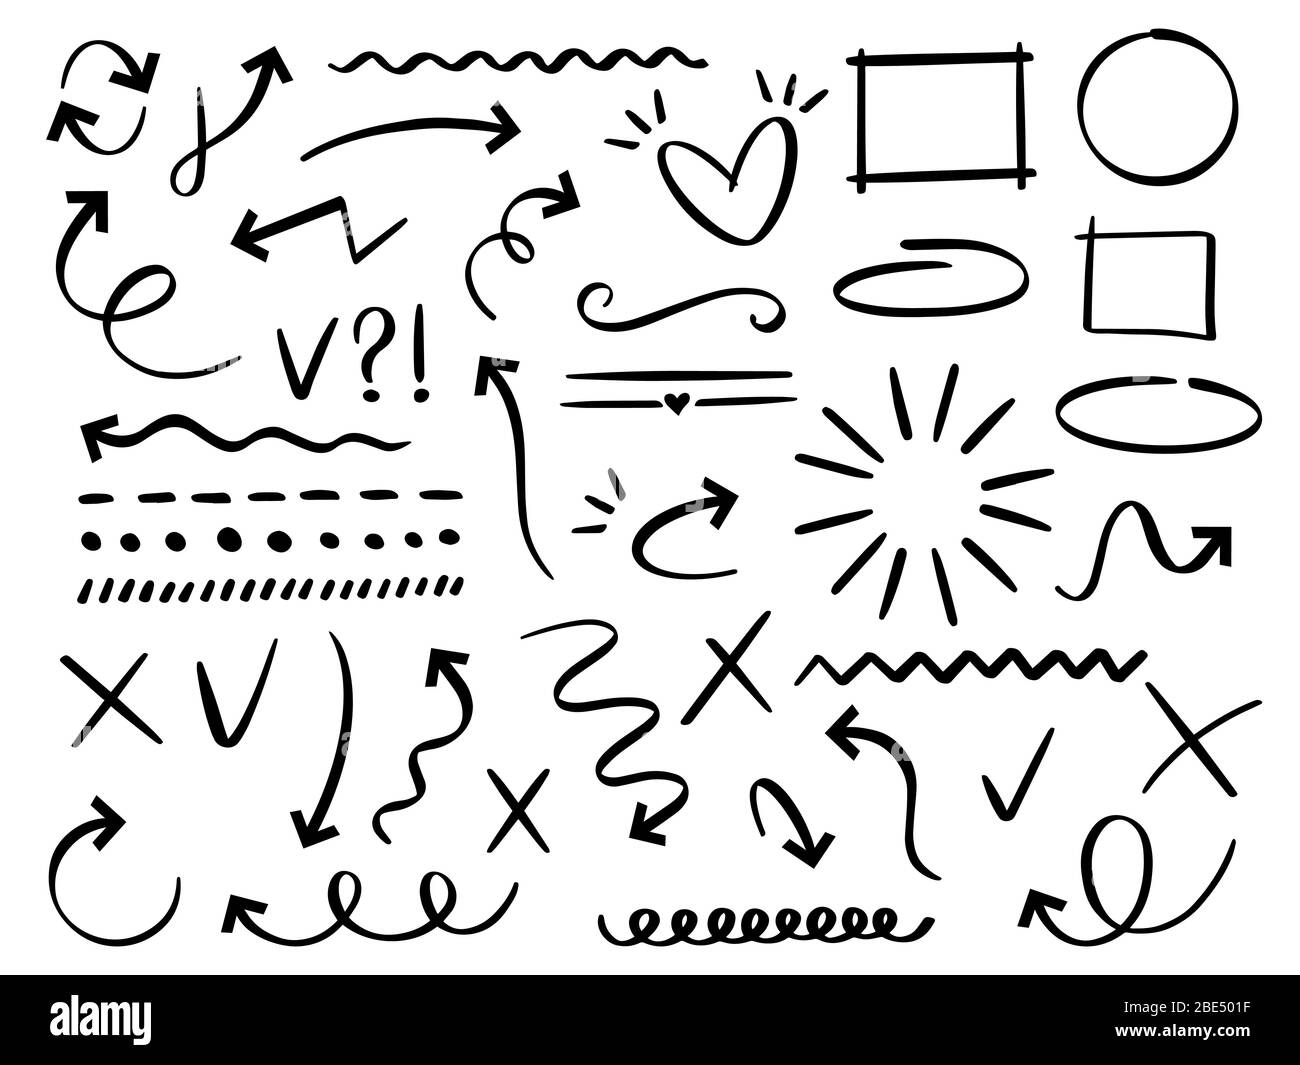 Sketch arrows and frames. Hand drawn arrow, doodle divider and circle, oval and square frame vector set. Collection of different abstract symbols Stock Vector